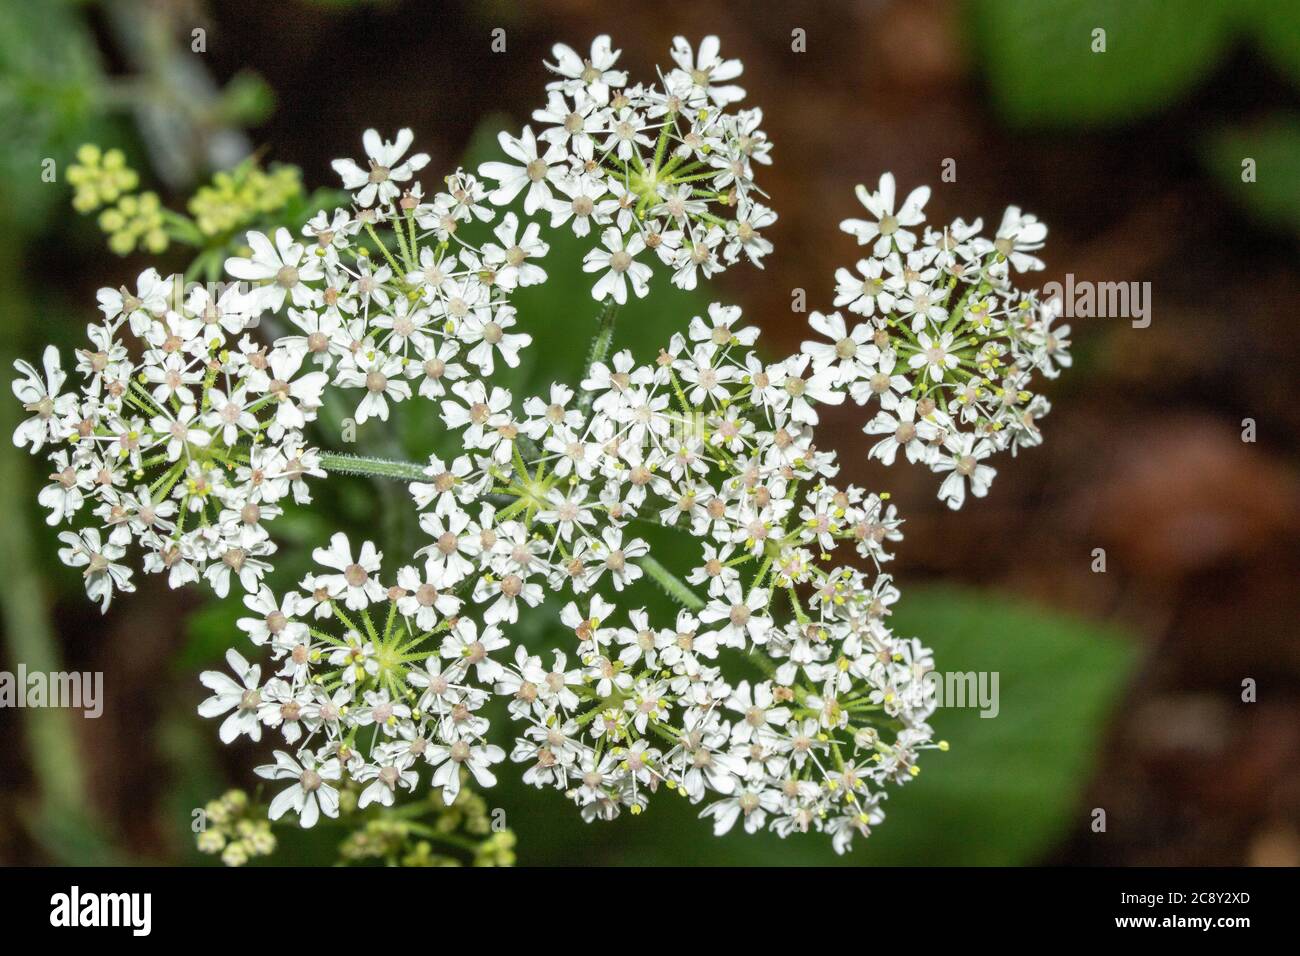 Hogweed flowering head in natural close up Stock Photo